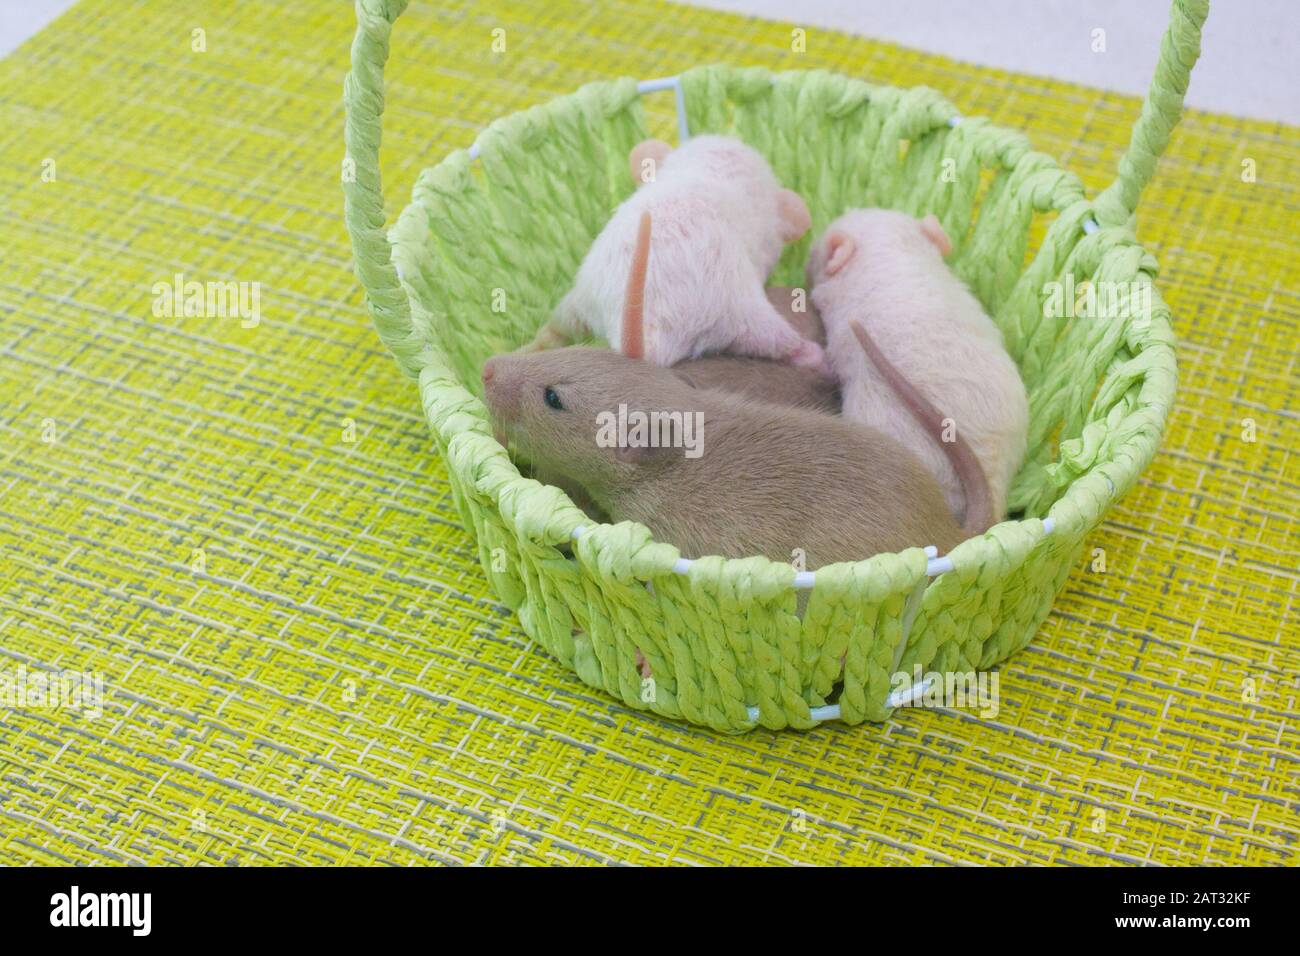 Rats are children in a green basket. Cute rat kids Stock Photo